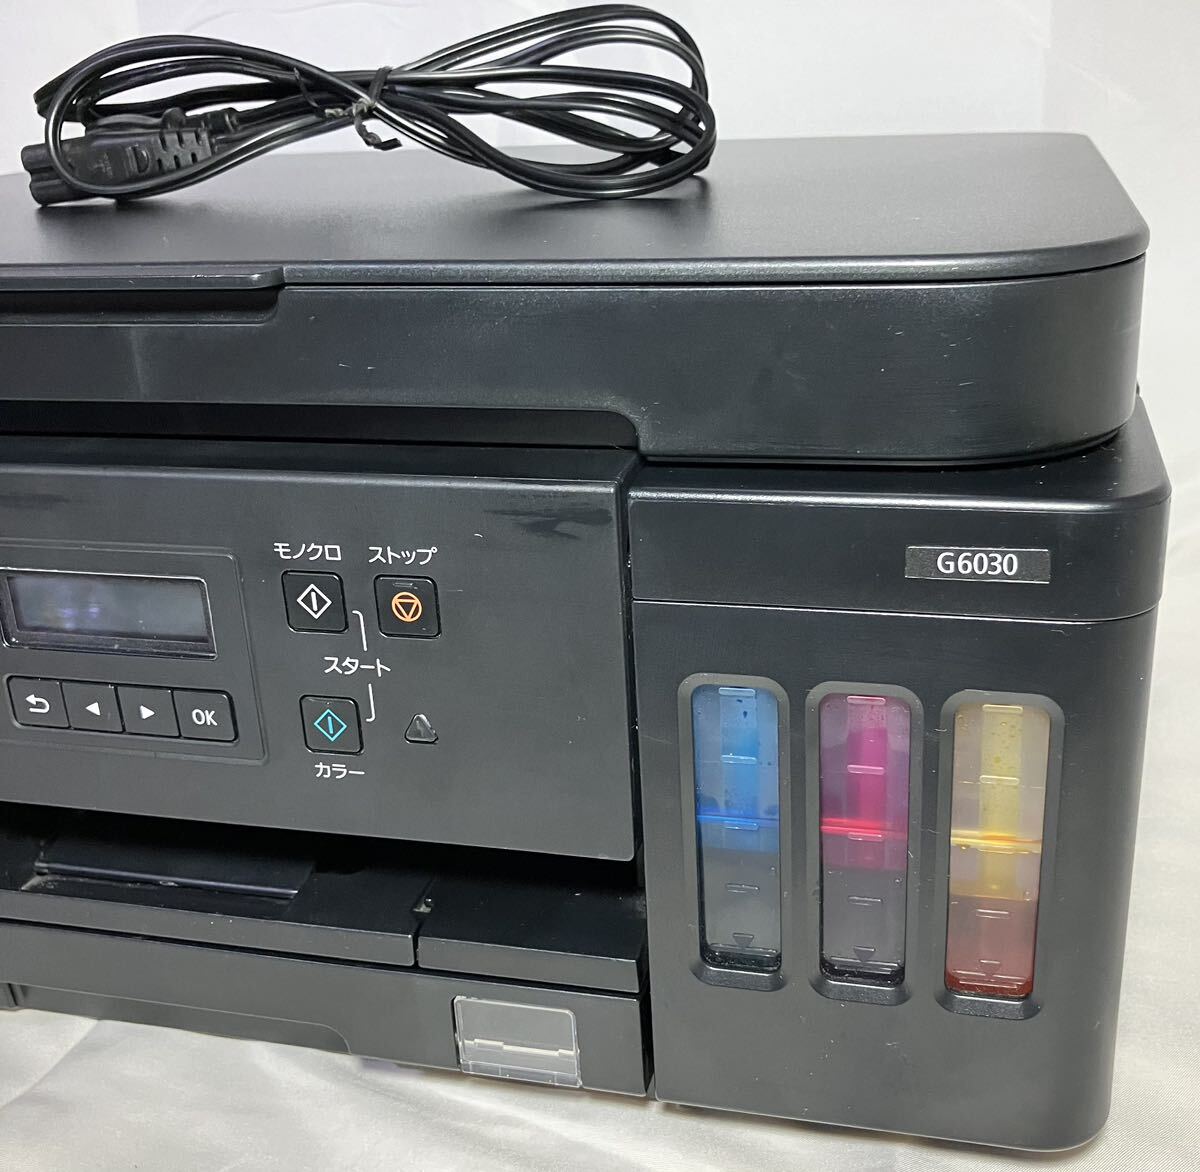 KGNY4066 Canon Canon G6030 Special high capacity Giga tanker installing black ink-jet printer multifunction machine Junk present condition goods 